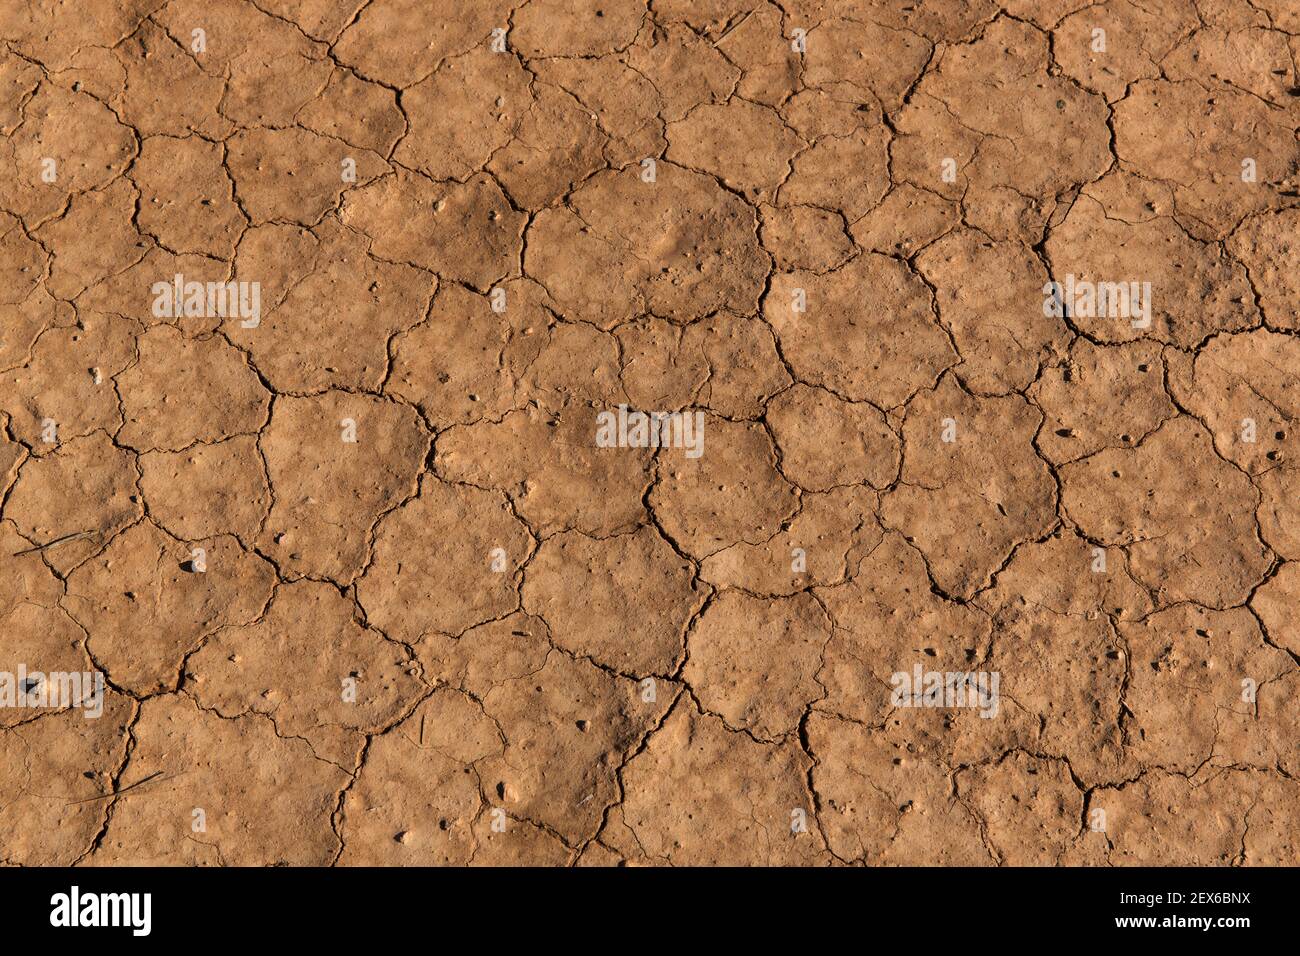 mud caked dry earth Stock Photo